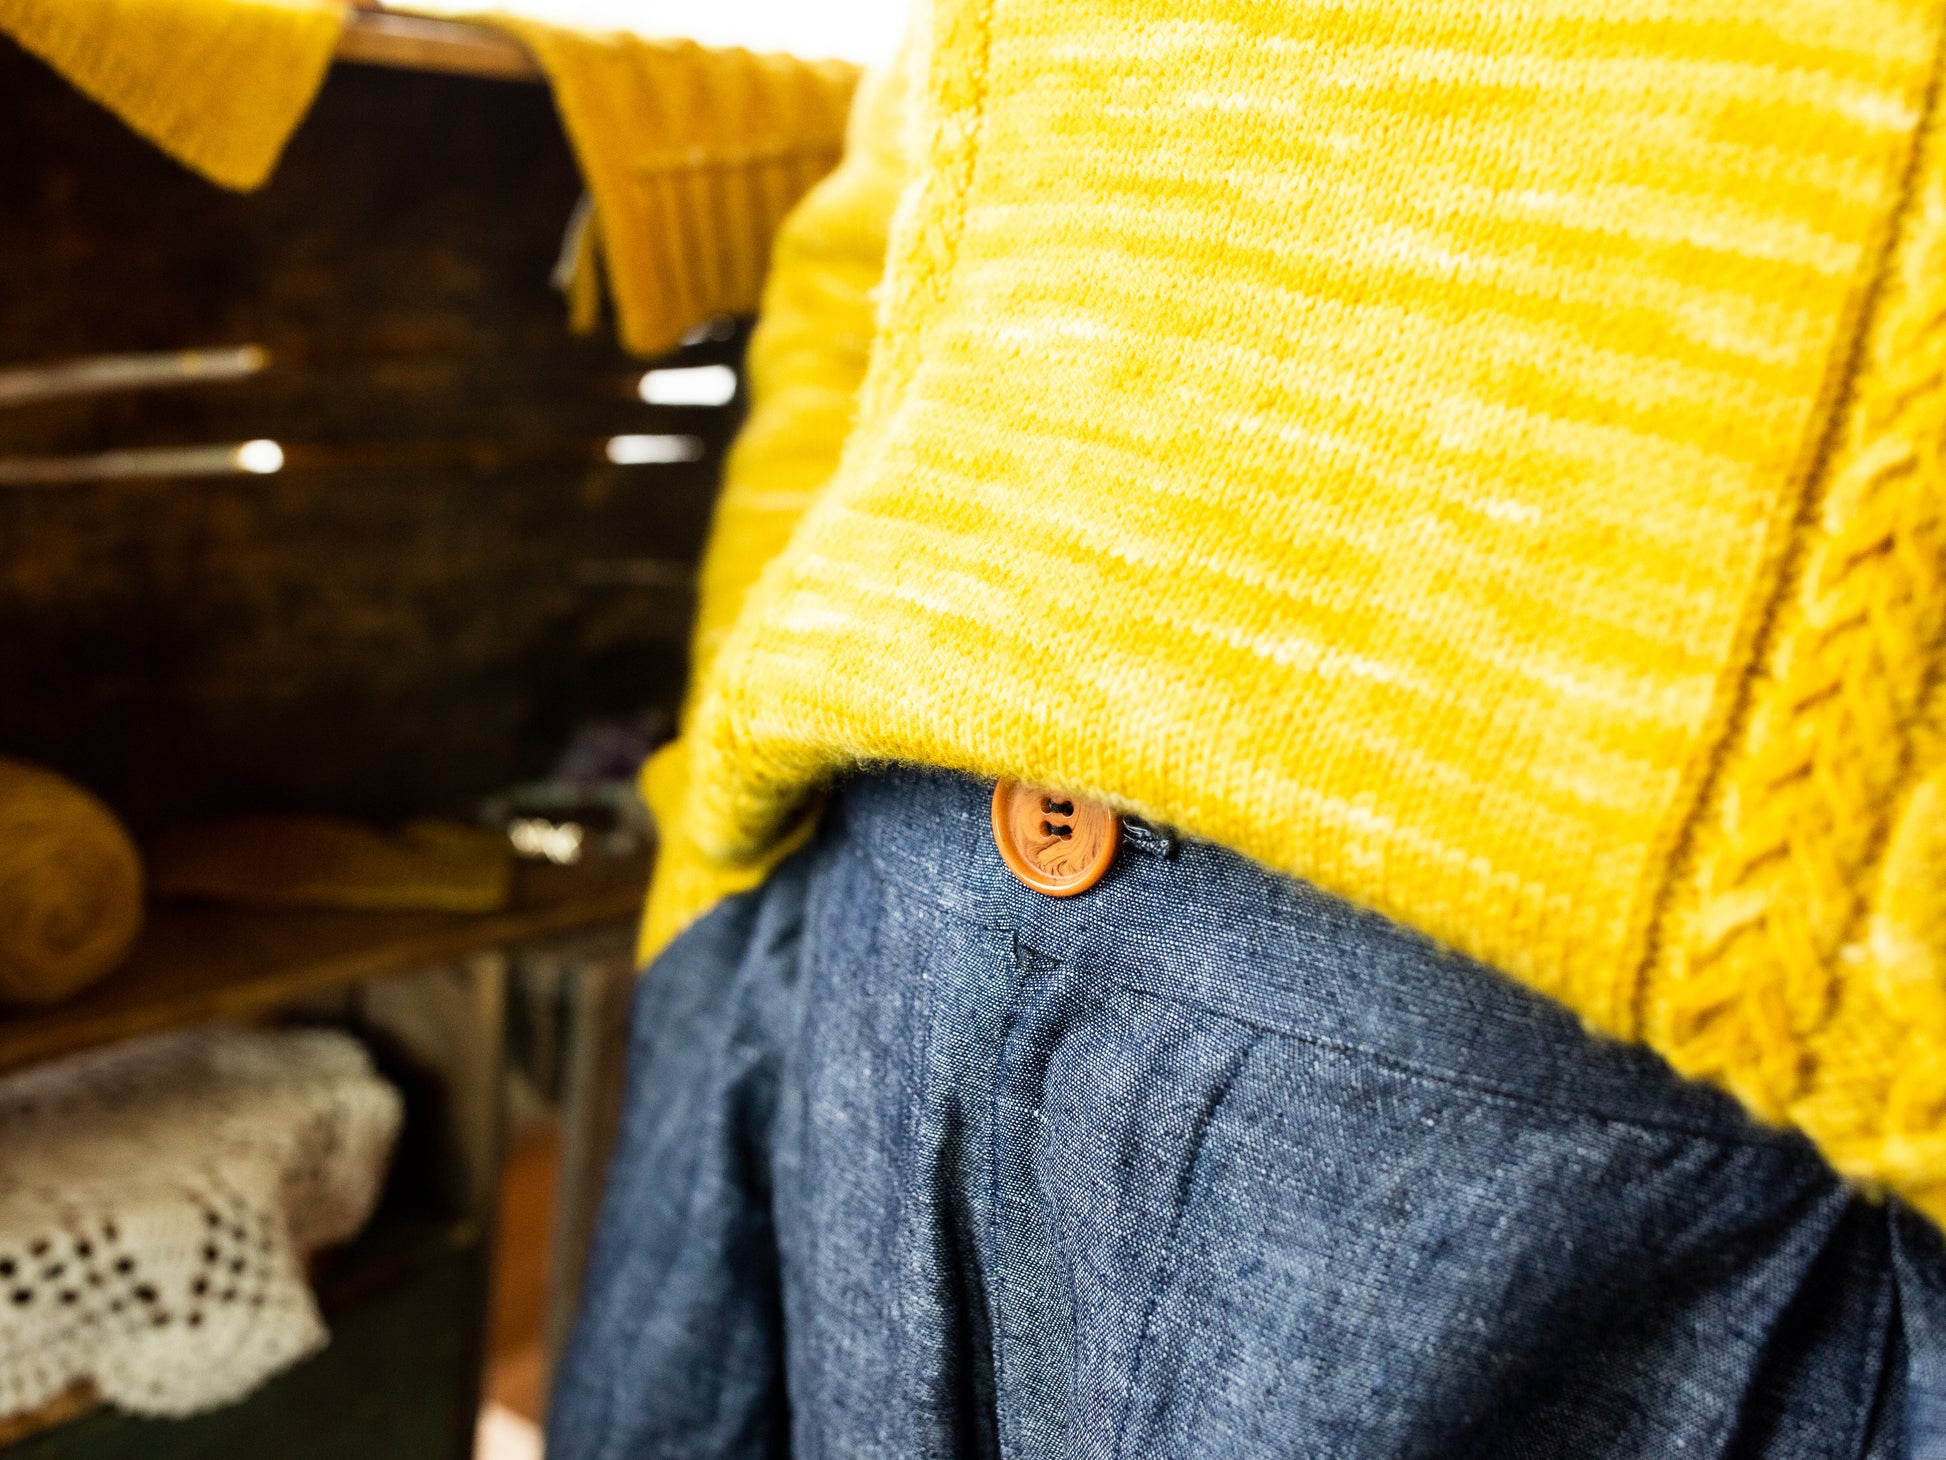 Seen close up, Jen wears a bright yellow sweater, knit with cable strips, tucked into a pair of blue pants. Knit swatches can be seen in the background on a wooden shelf.